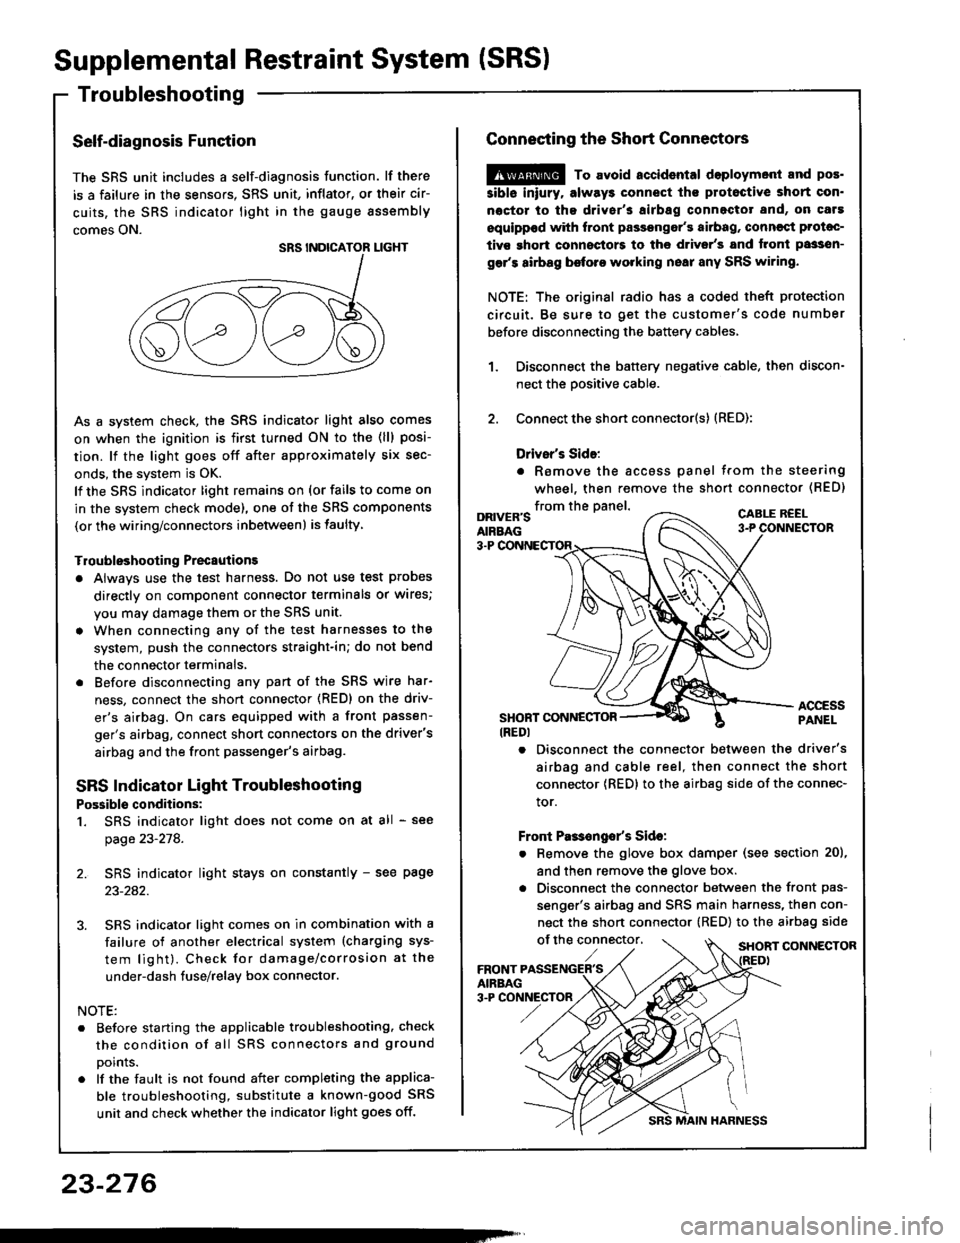 HONDA INTEGRA 1994 4.G Service Manual Supplemental Restraint System (SRSI
Troubleshooting
Self-diagnosis Function
The SRS unit includes a self-diagnosis function. lf there
is a failure in the sensors. SRS unit, inflator, or their cir-
cui